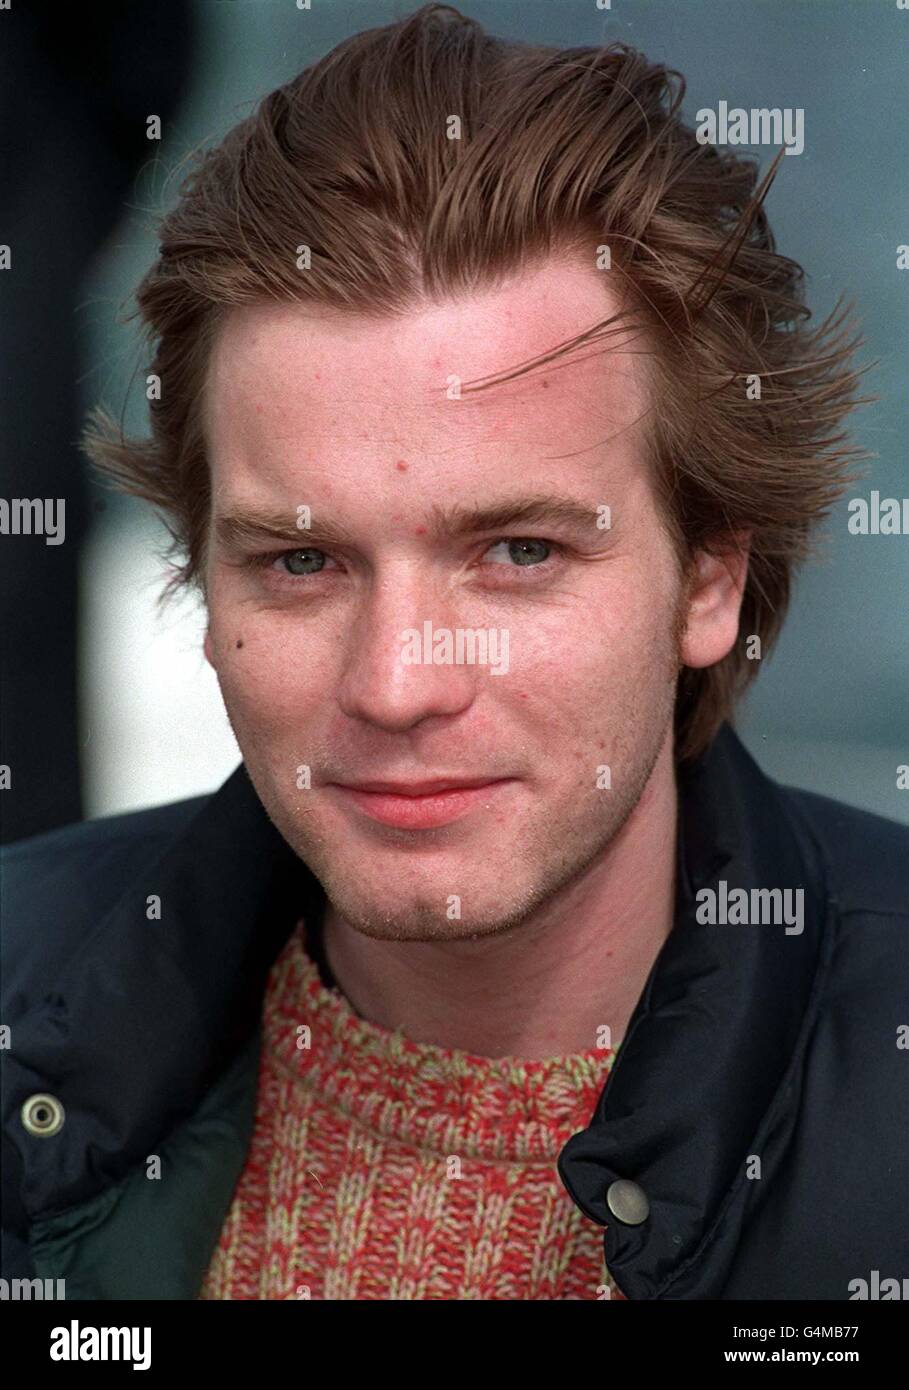 Ewan McGregor at a photocall on the Majestic Beach Pier to promote his new movie 'Nora' in which he takes a co-producer role produced through his production company Natural Nylon during the Cannes Film Festival 1999 in France. Stock Photo